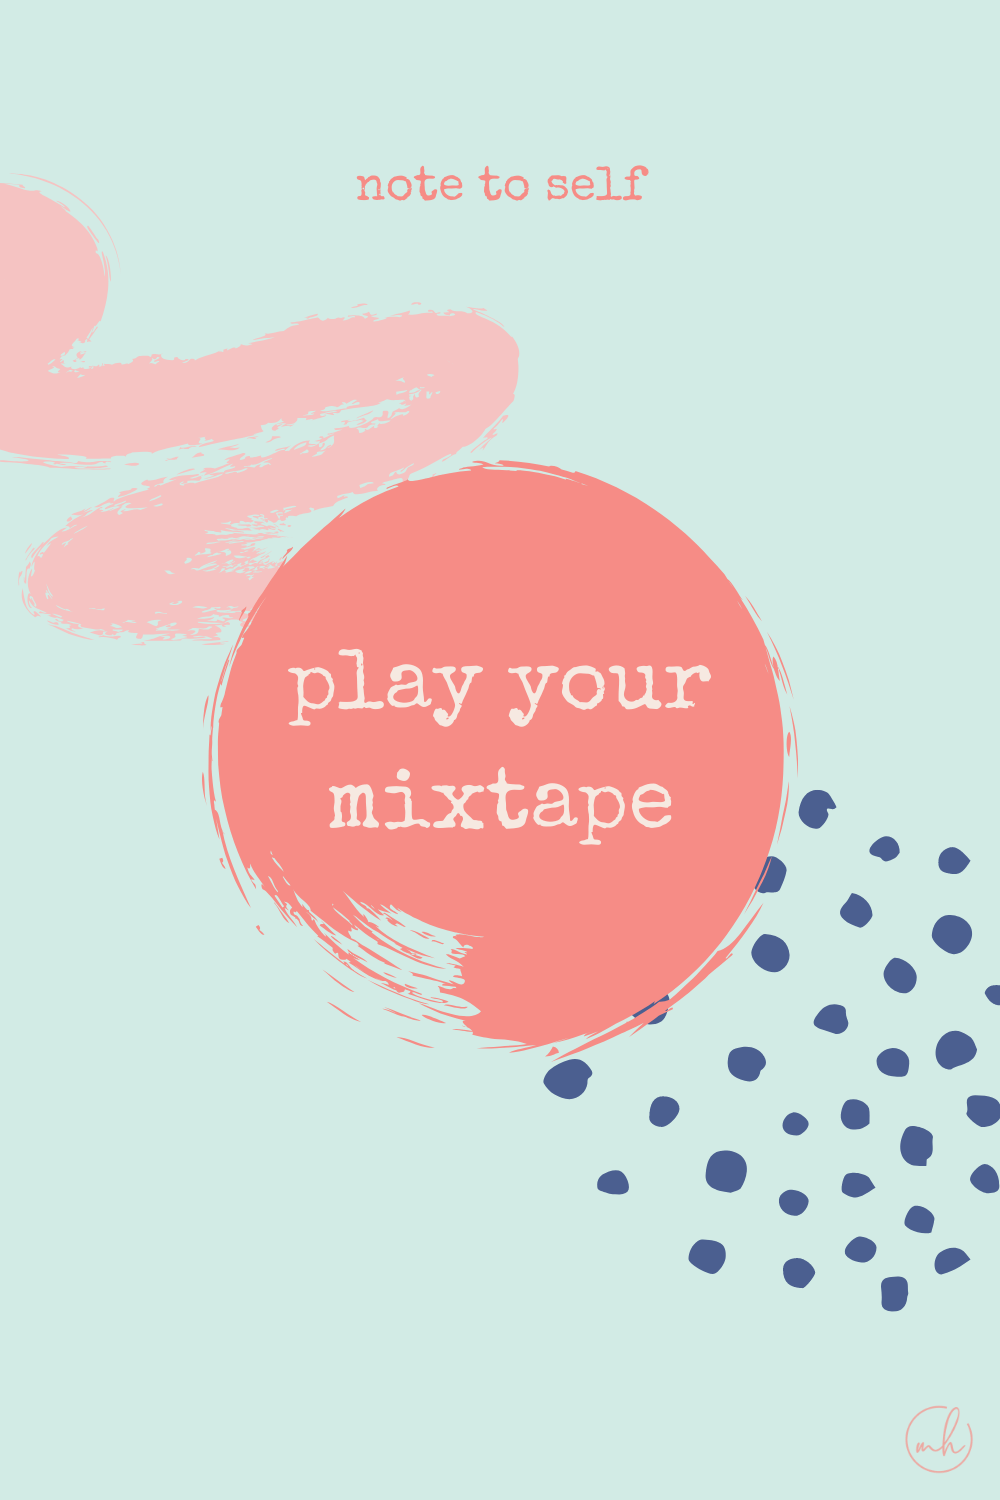 Play your mixtape - Note to self quotes | myhoogah